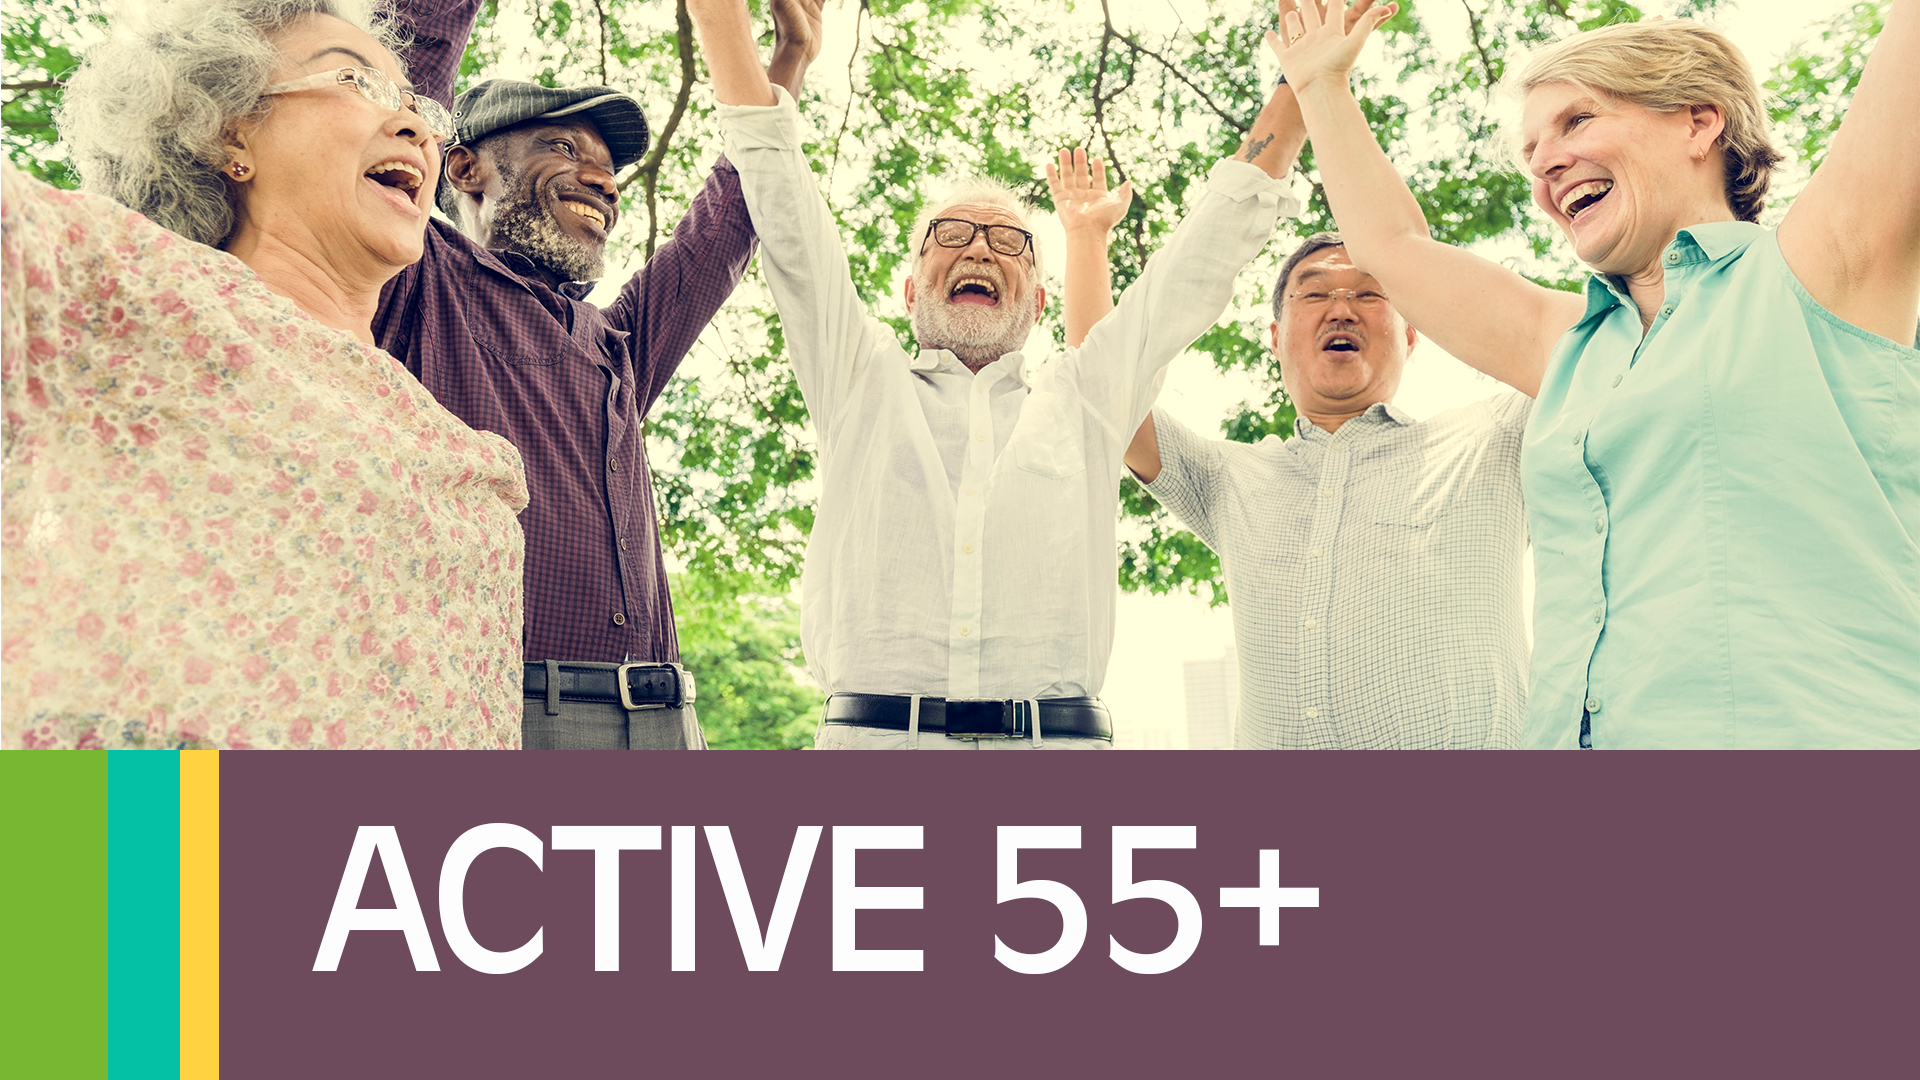 Image reads "Active 55+" in a purple box along the bottom of the image. A group of happy seniors take up the top portion of the picture. 